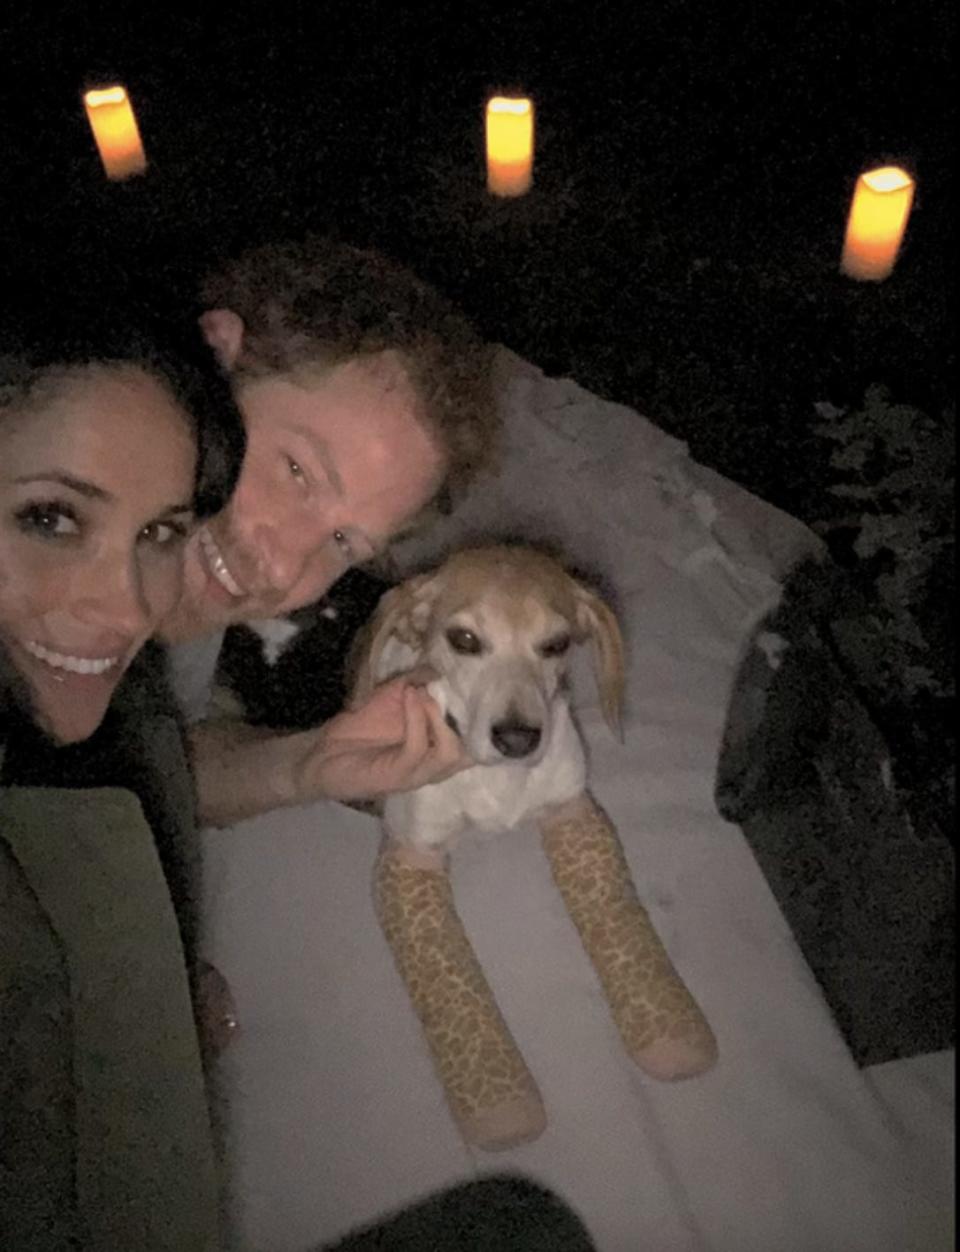 Prince Harry and Meghan Markle on a blanket with their dog after they got engaged in 2017.